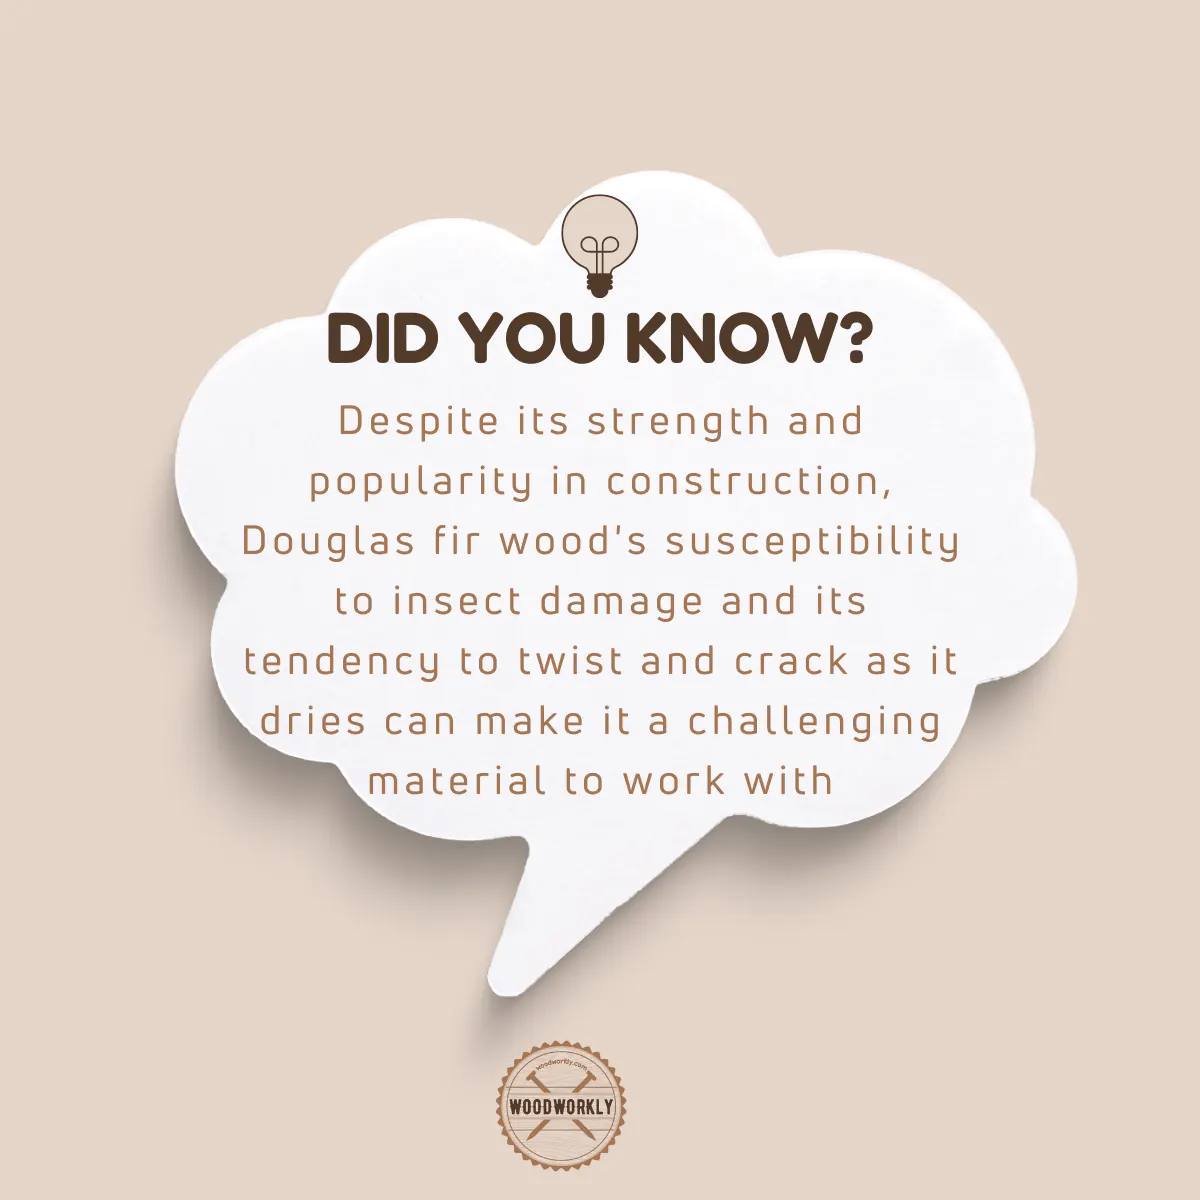 Did you know fact about Douglas Fir